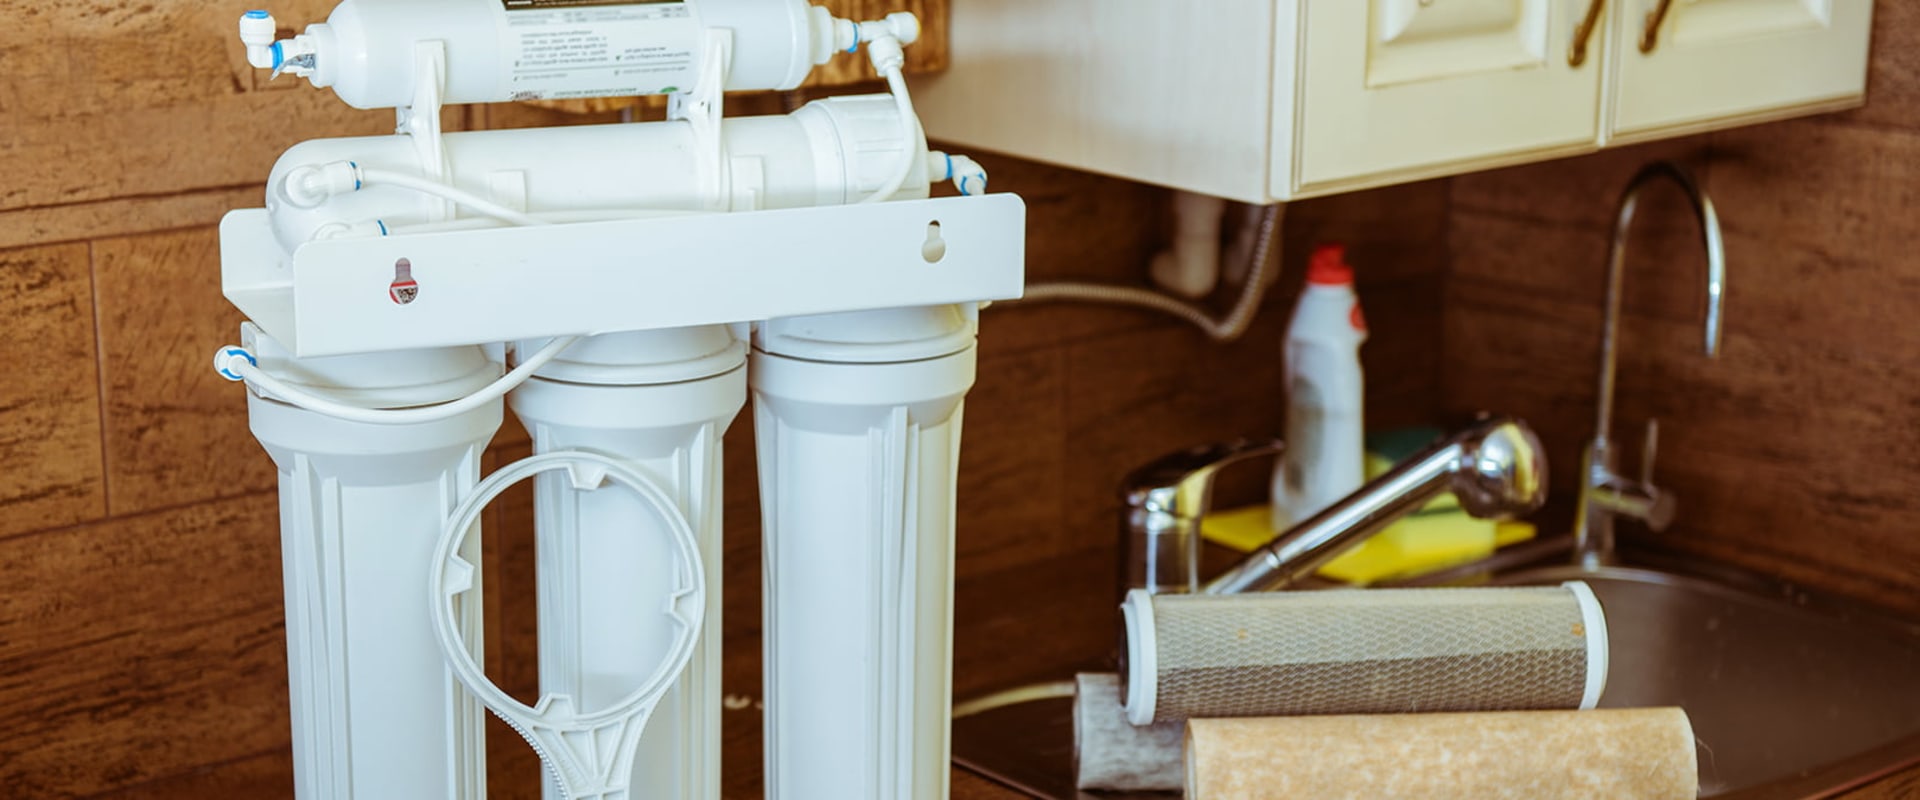 Choosing the Right Water Filtration System: Under-Sink vs. Whole House Reverse Osmosis